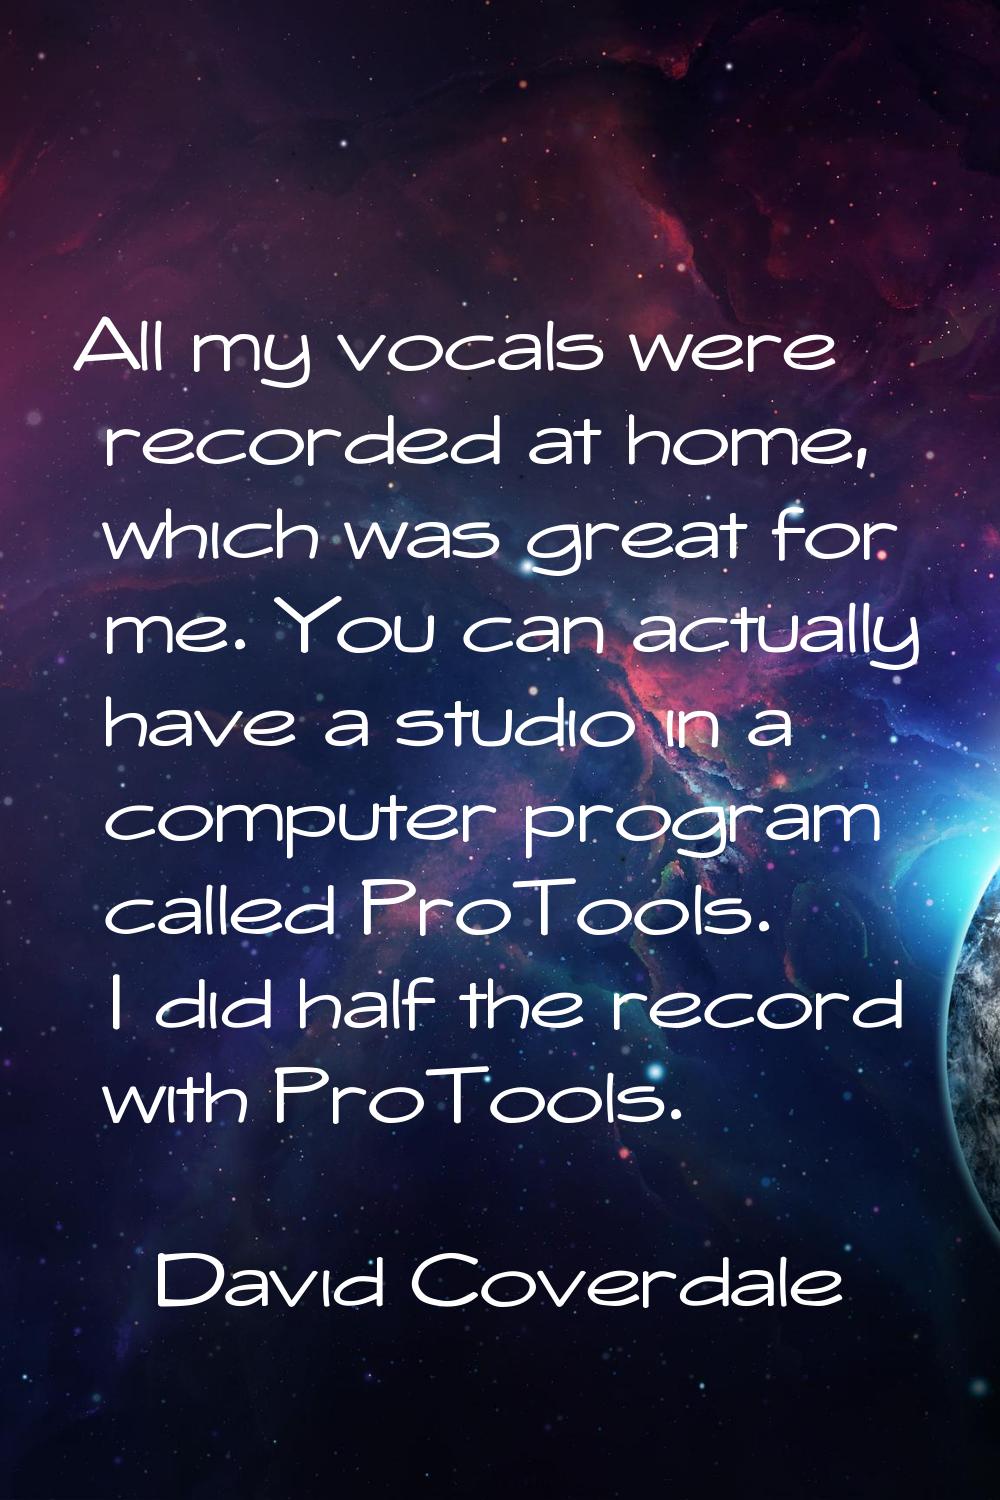 All my vocals were recorded at home, which was great for me. You can actually have a studio in a co